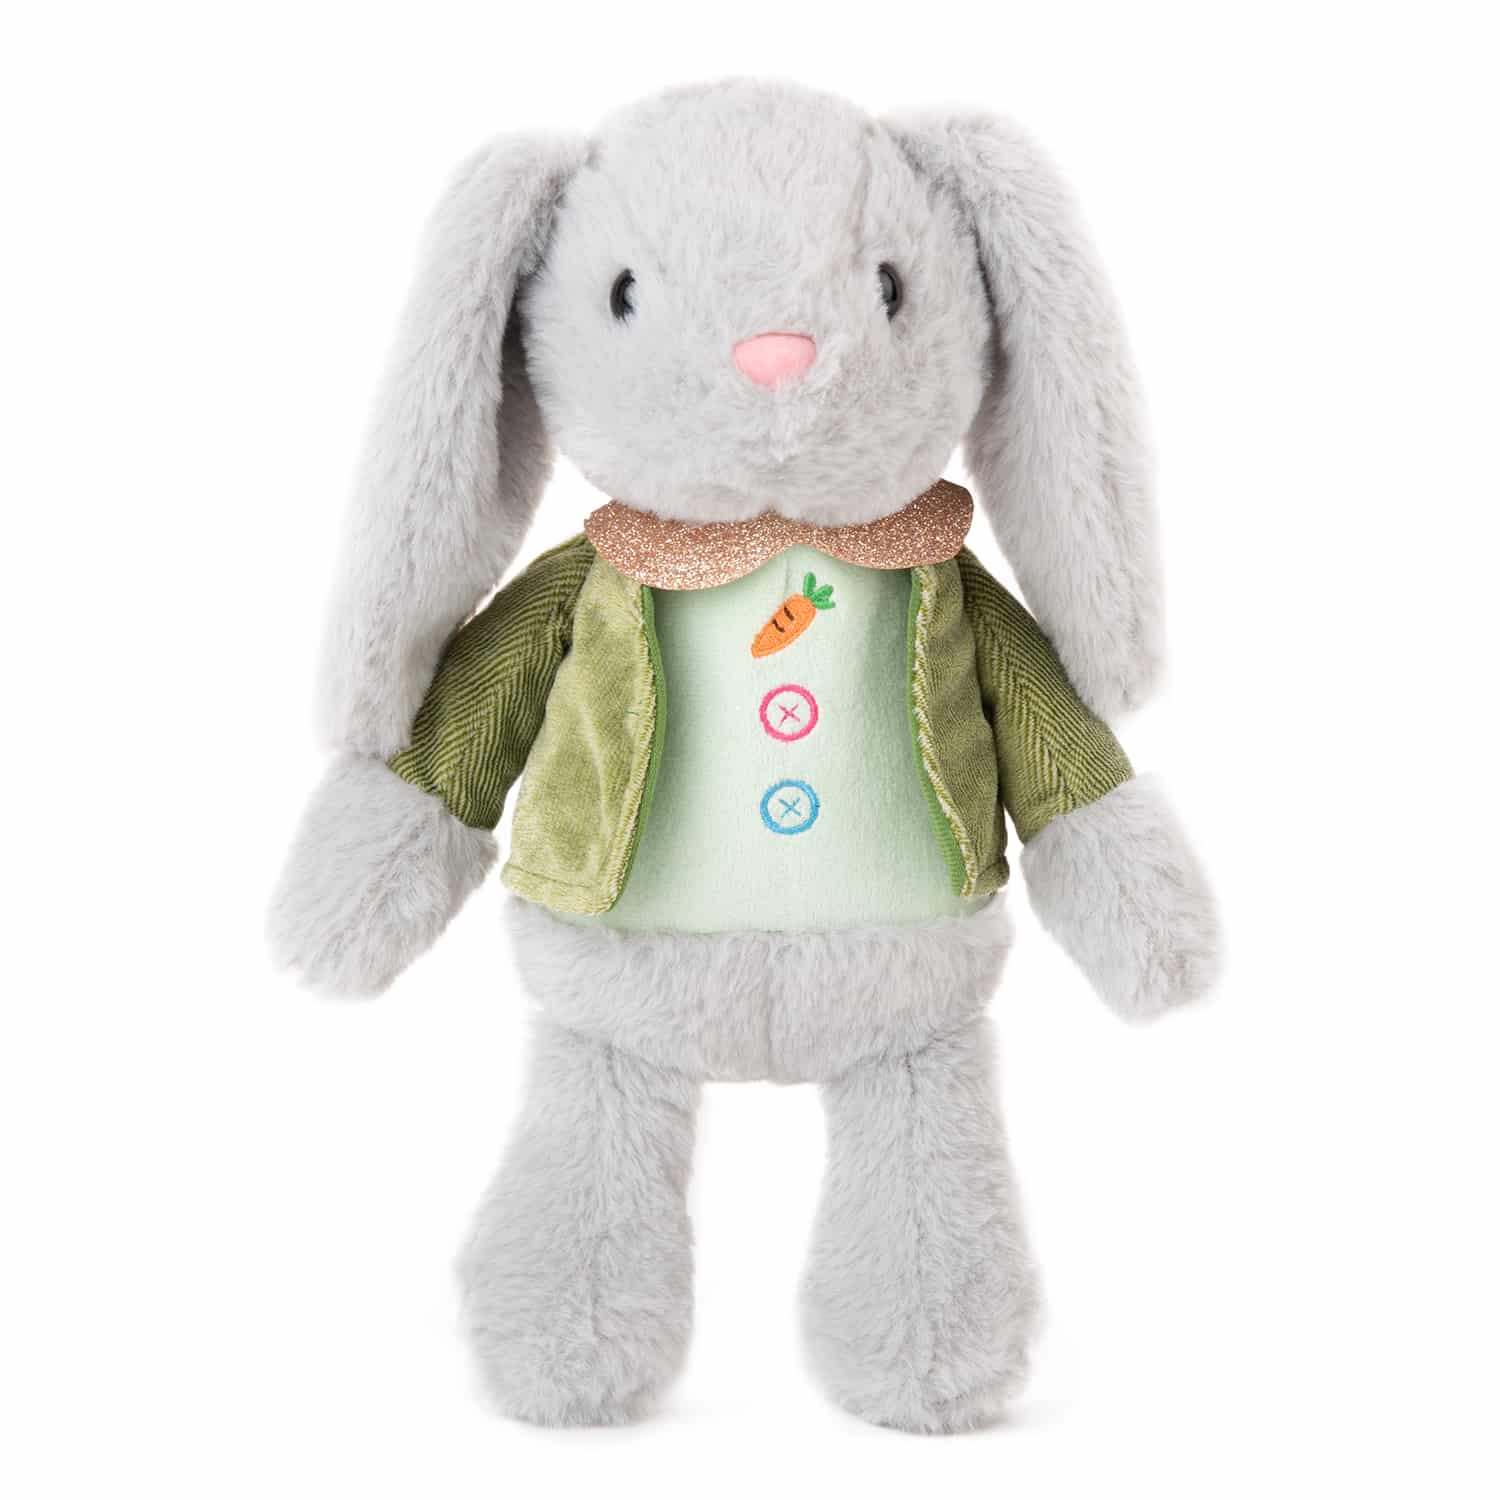 Rabbit - Grey with a green vest